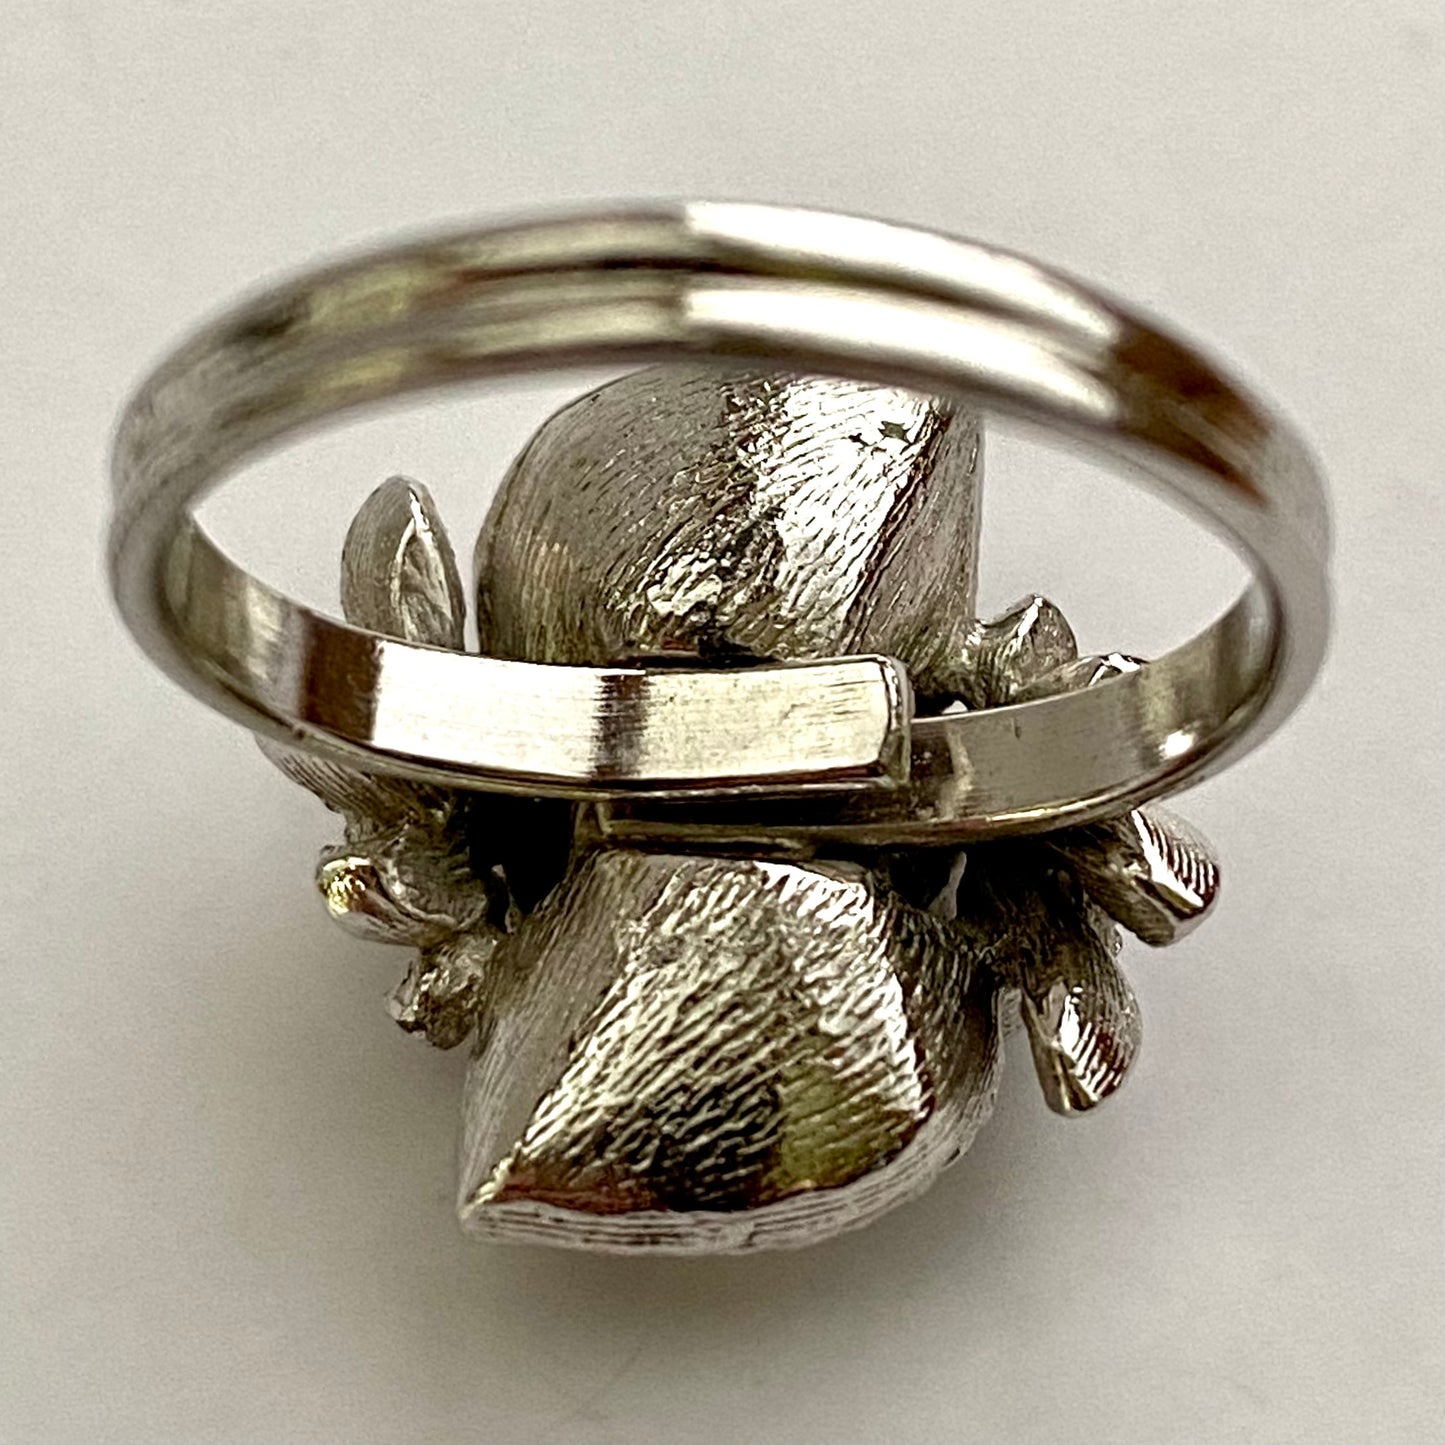 1973 Sarah Coventry Love Story Ring